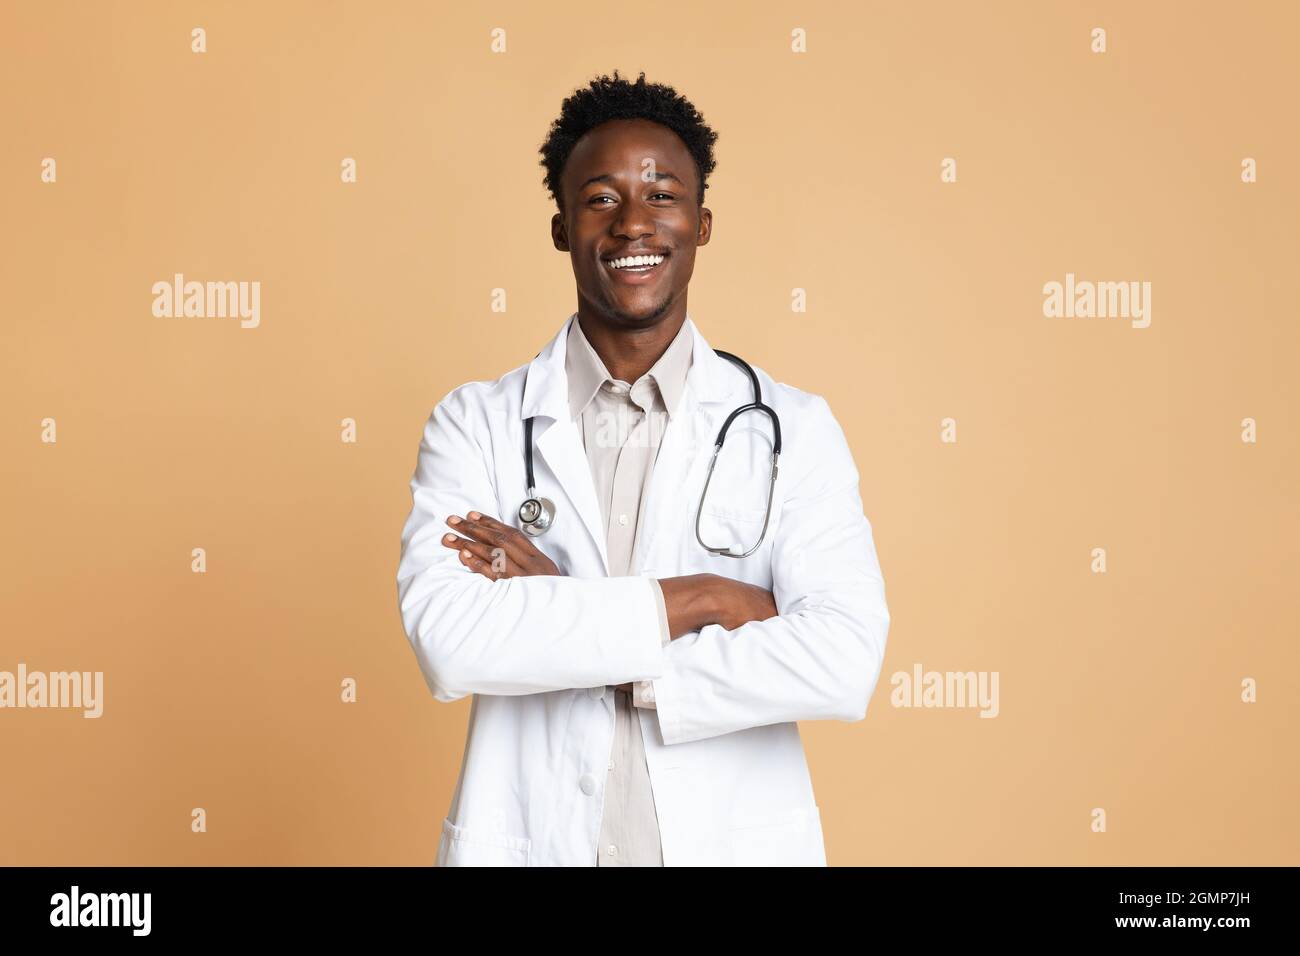 Portrait Of Confident Black Male Doctor In Uniform Posing Over Beige Background Stock Photo